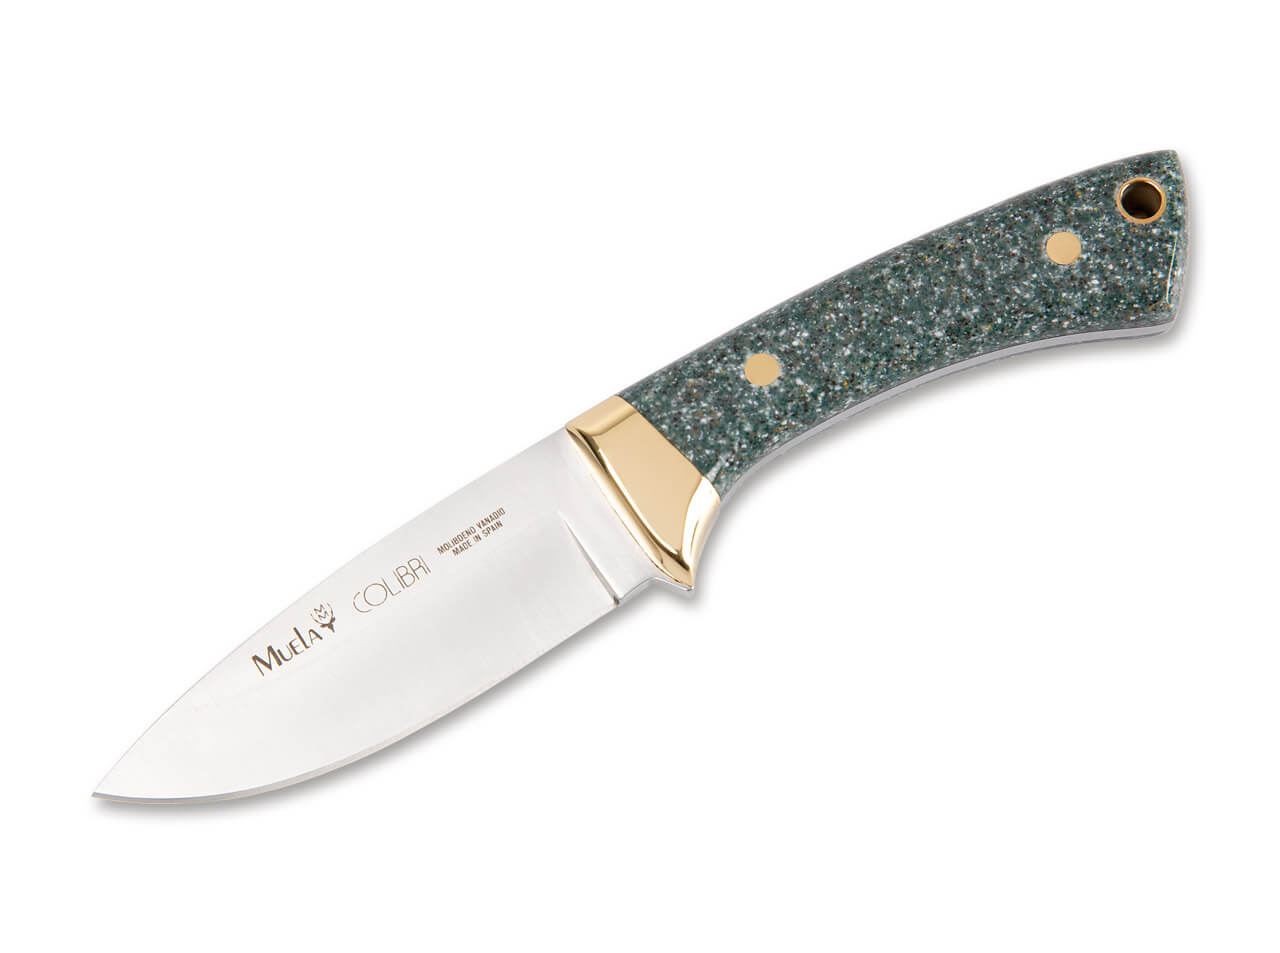 Muela Colibri knife with granite composite handle and leather sheath -  22-COL-7G - Muela